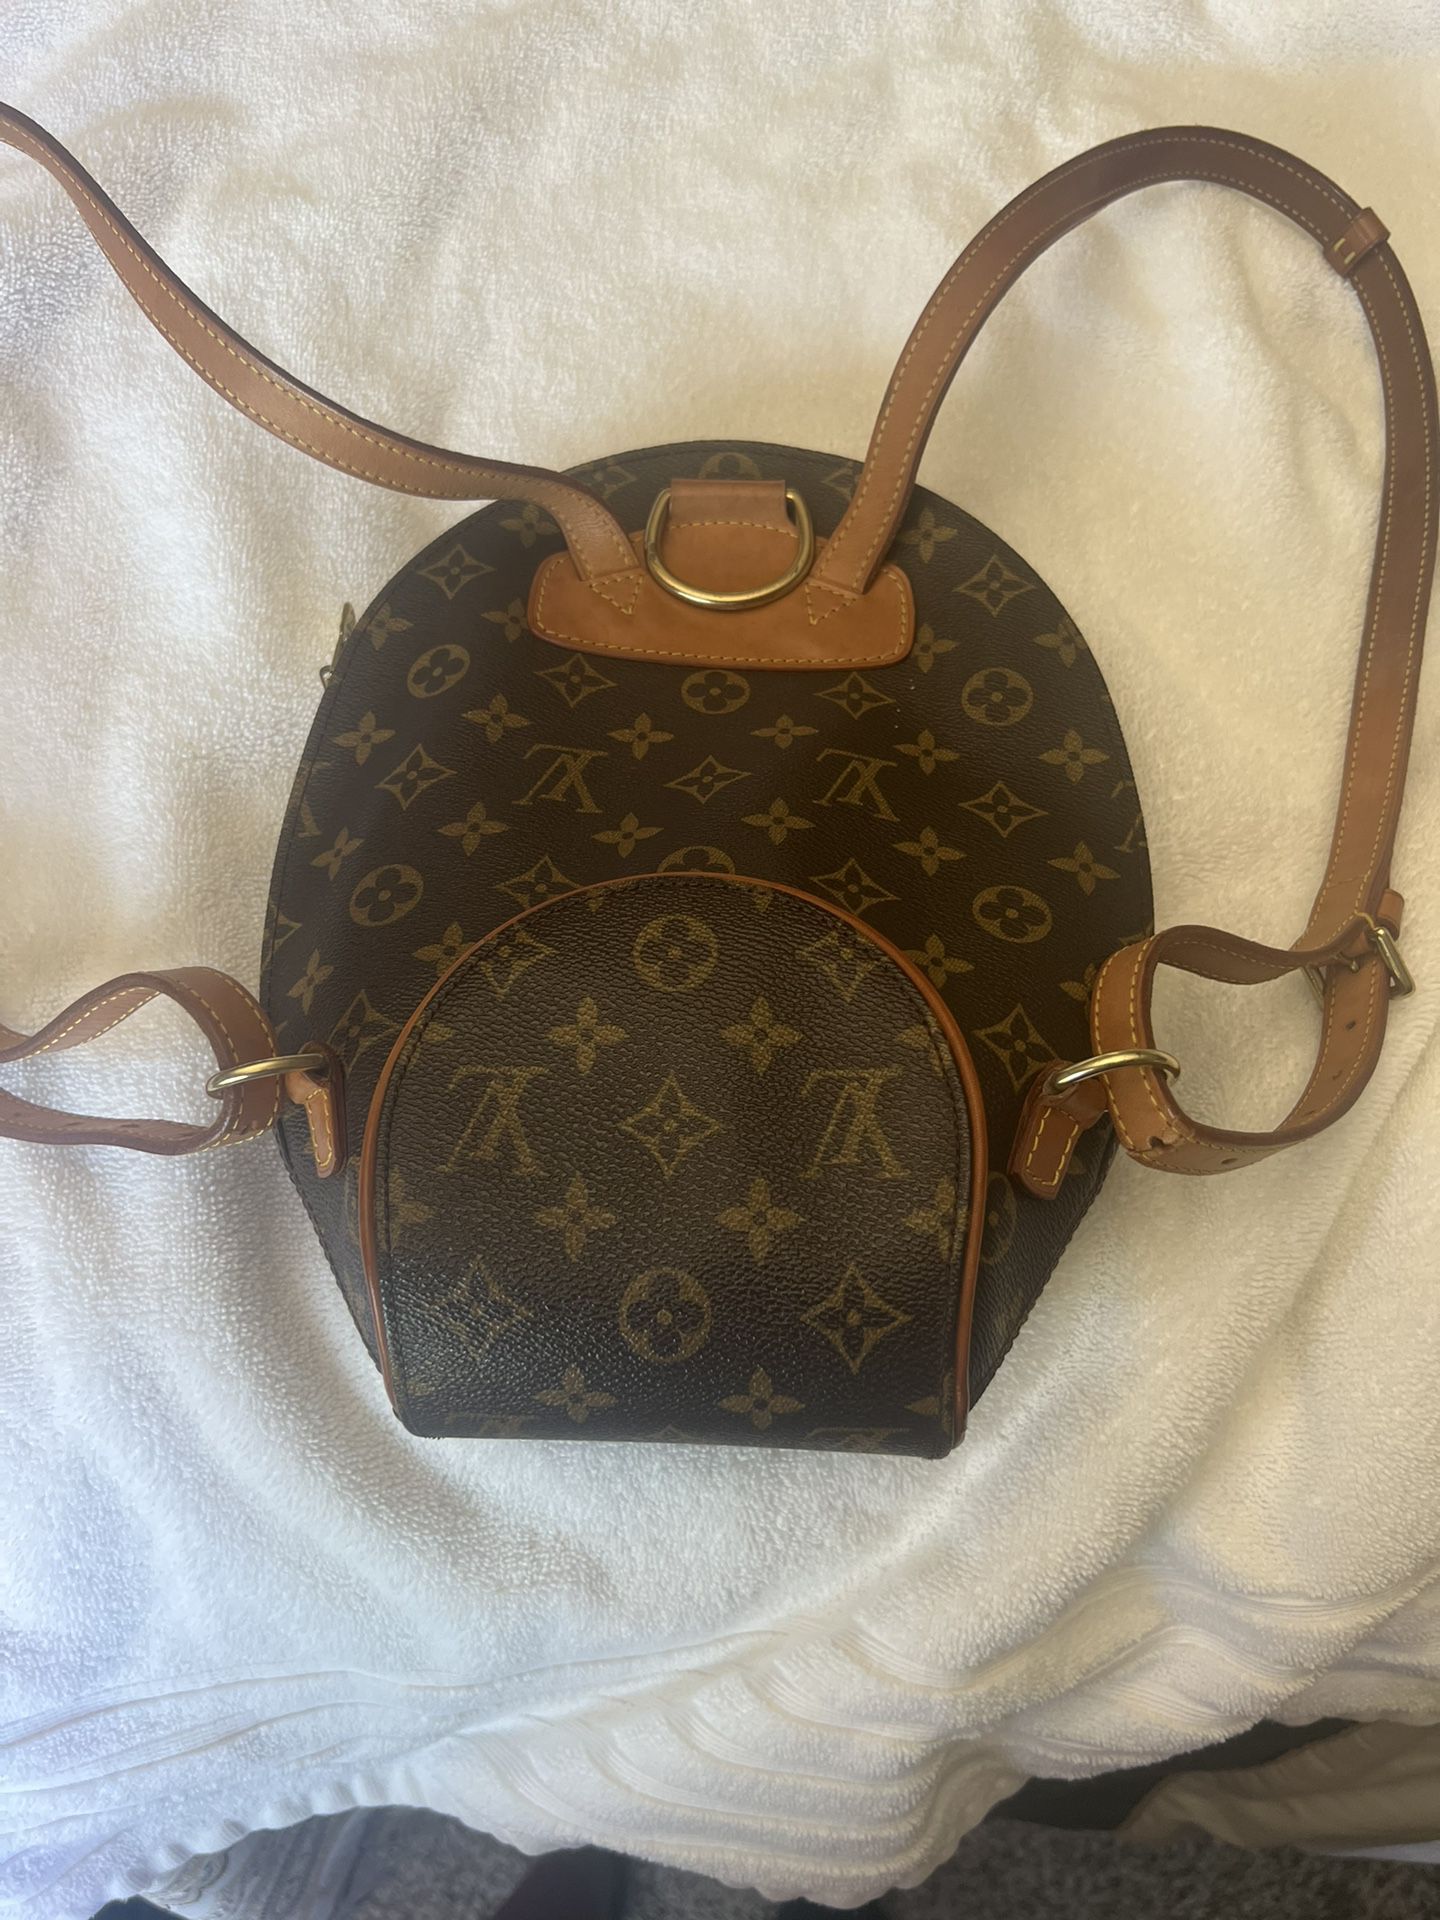 Used, Authentic LOUIS VUITTON Monogram Denim Sac A Dos PM Backpack Blue  M95056 for Sale in Temecula, CA - OfferUp